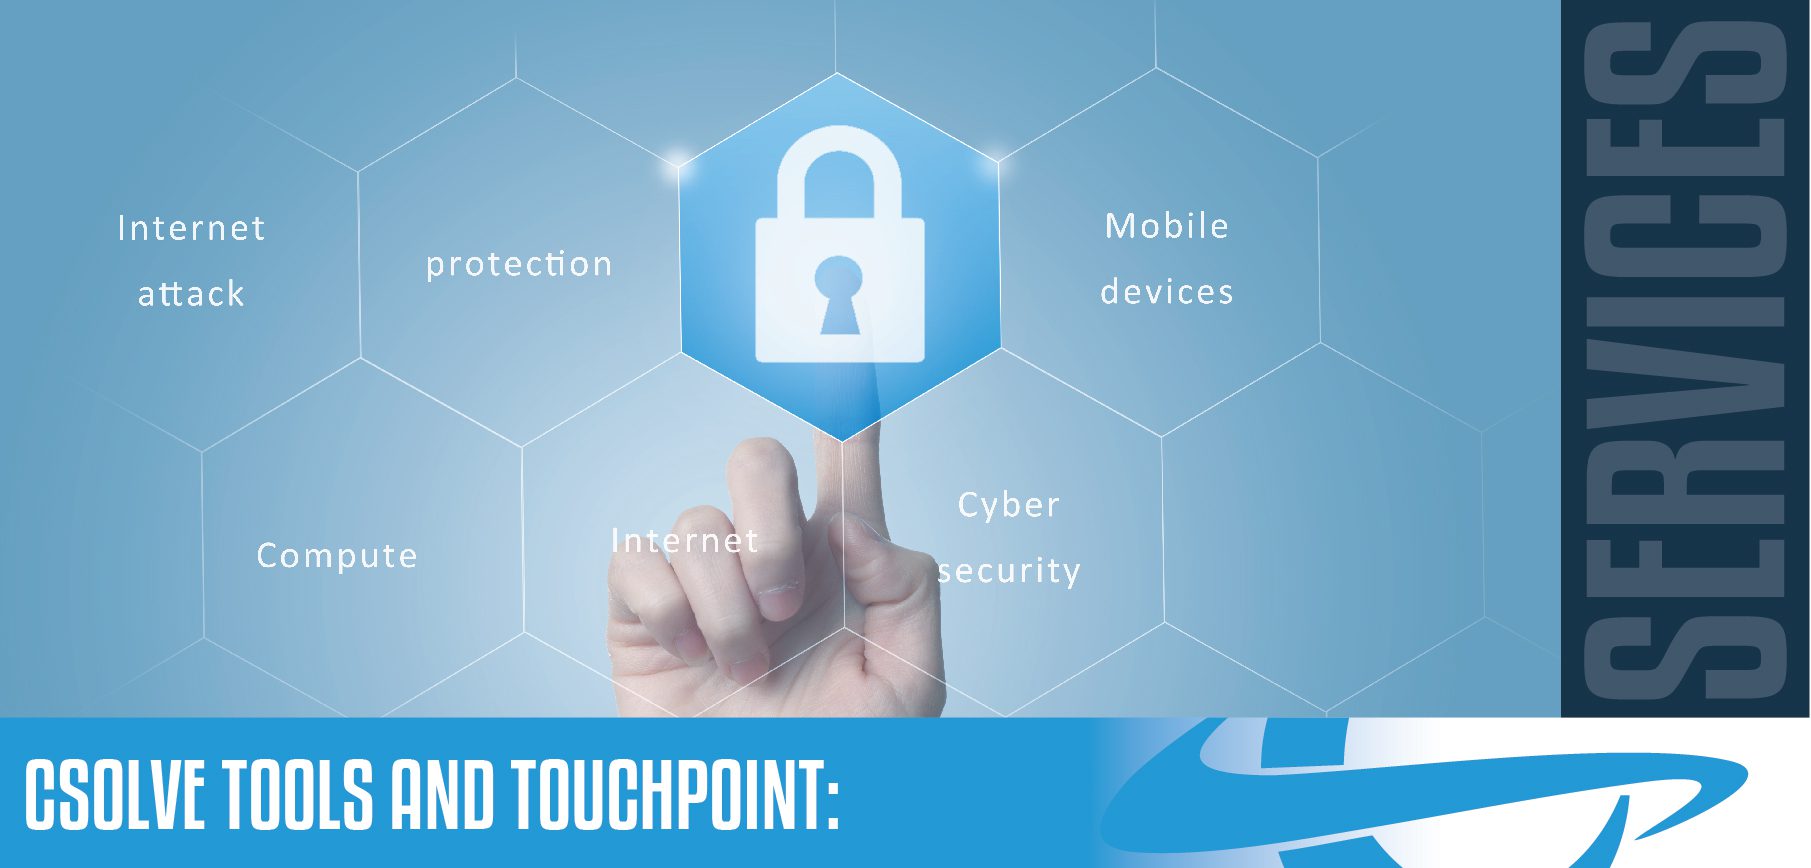 csolve tools and touchpoint